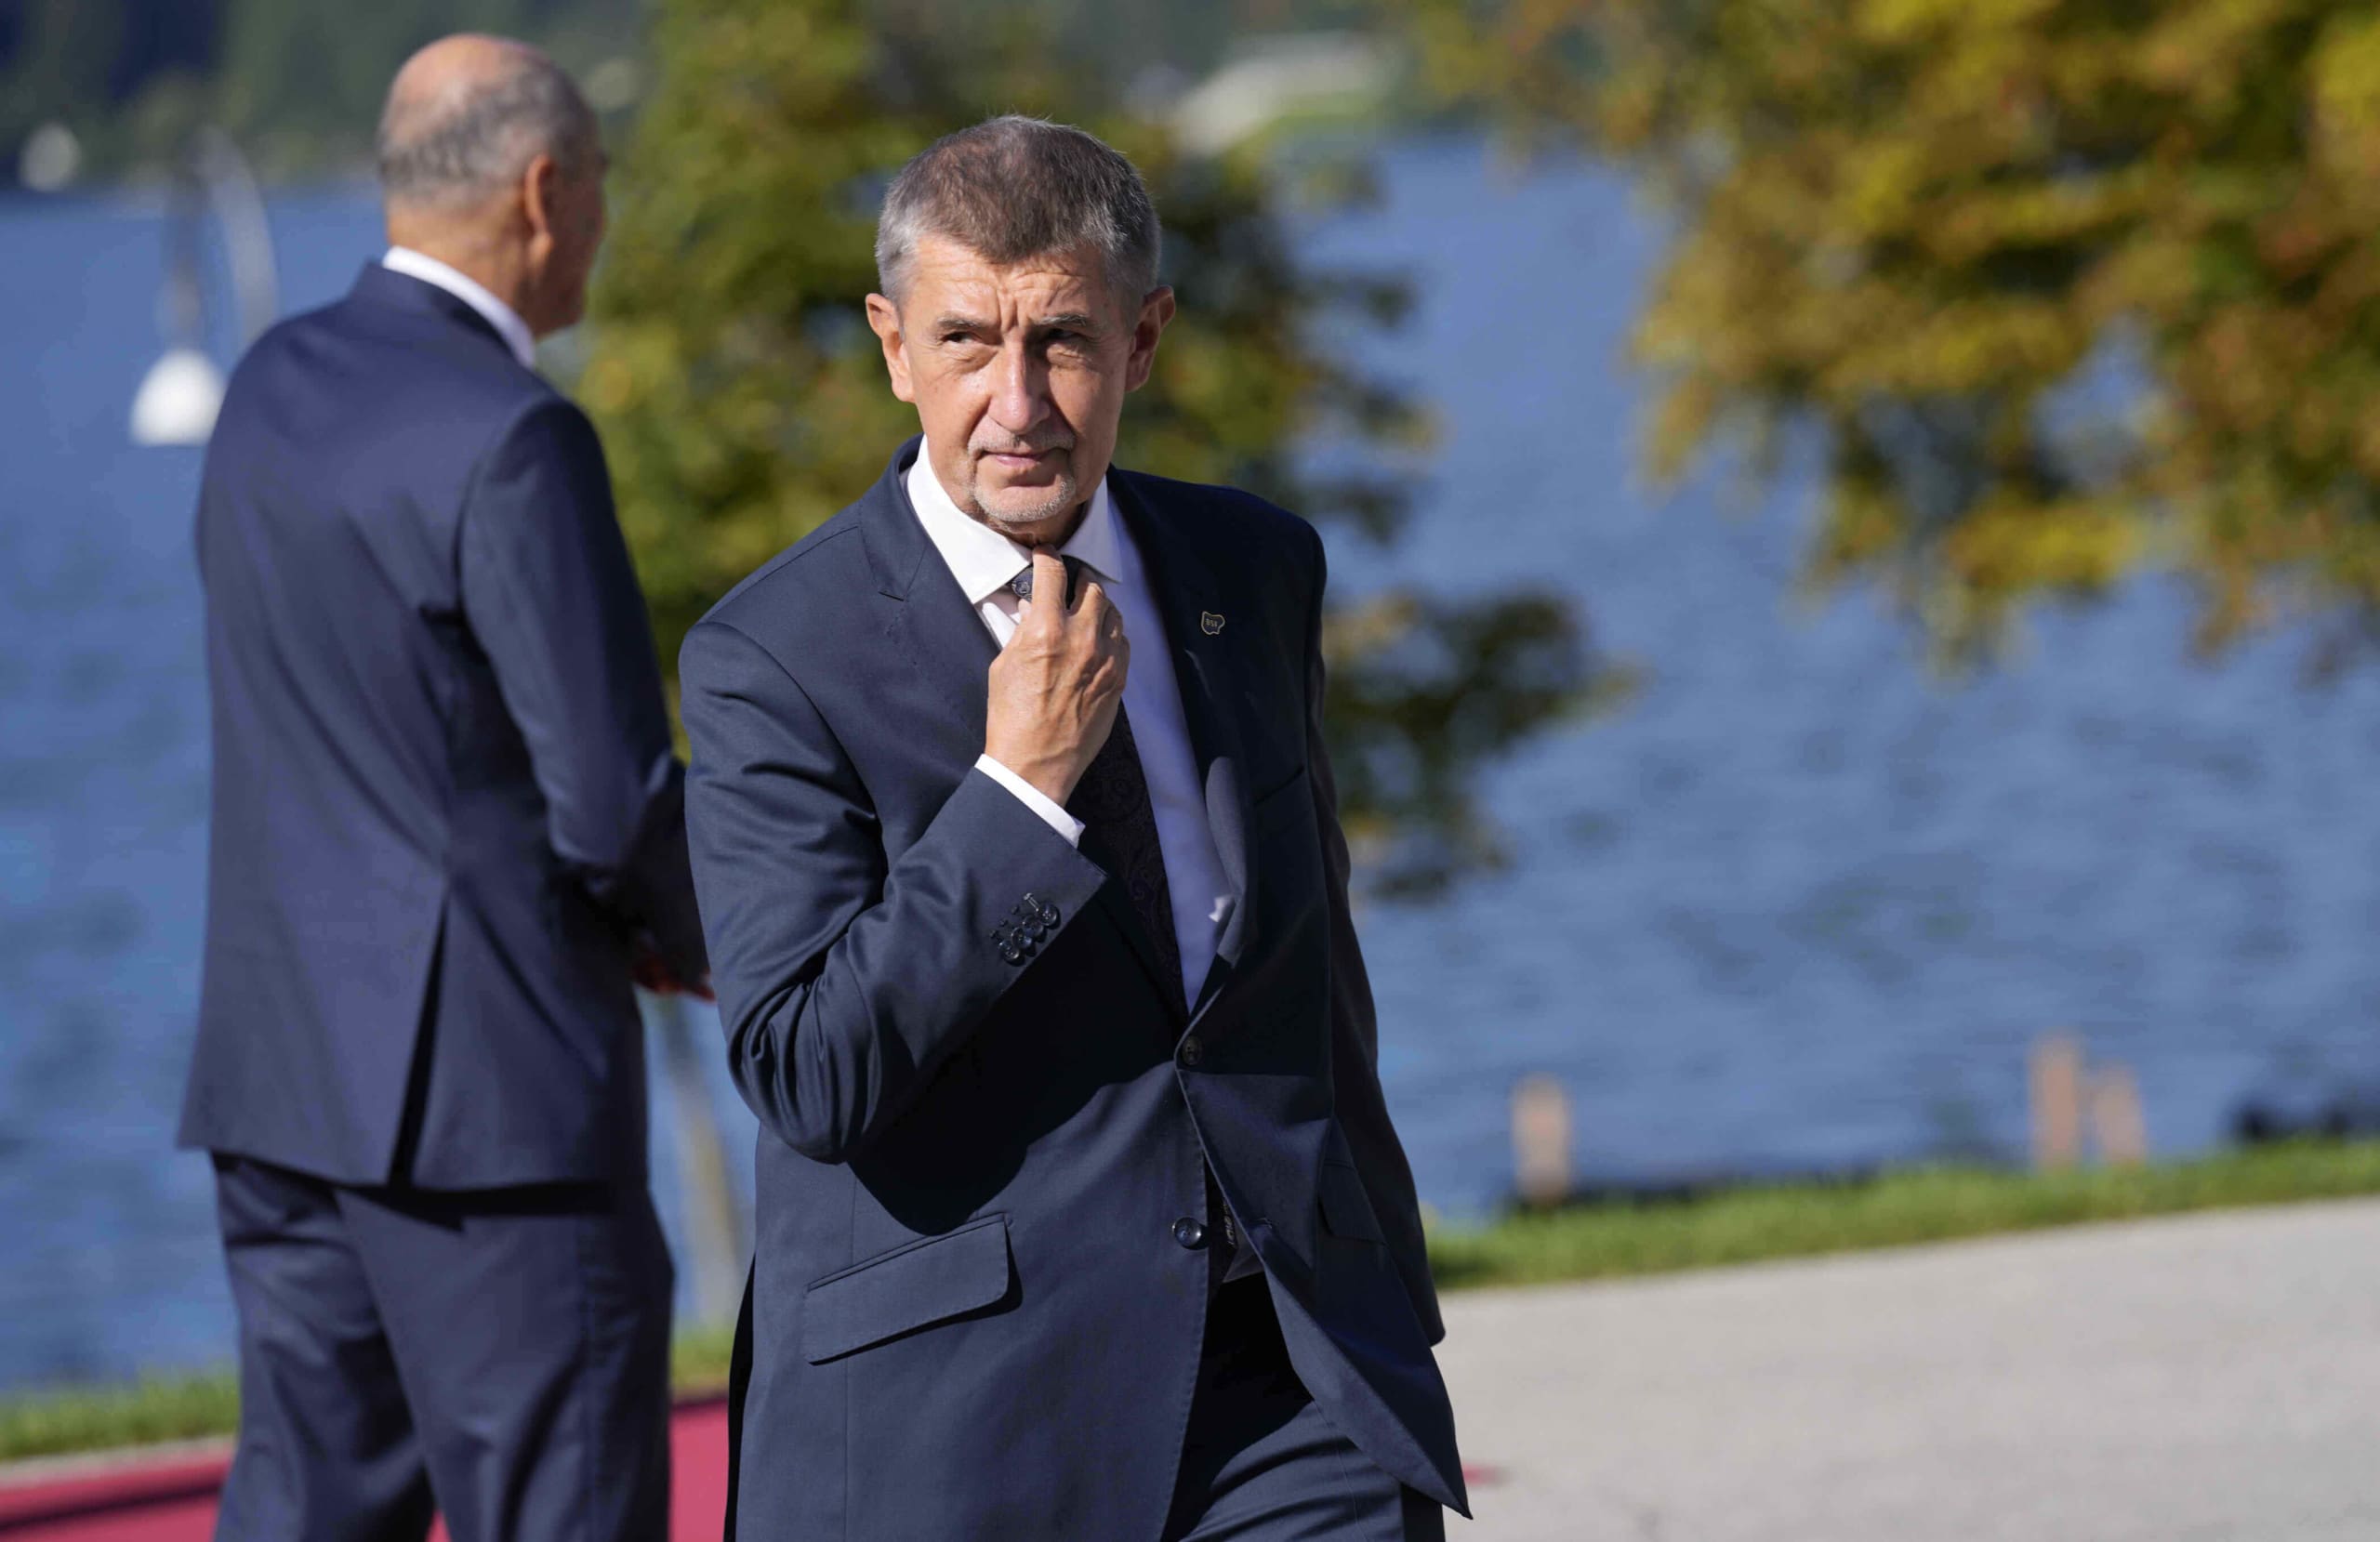 Czech PM Andrej Babiš at the Bled Strategic Forum in Slovenia